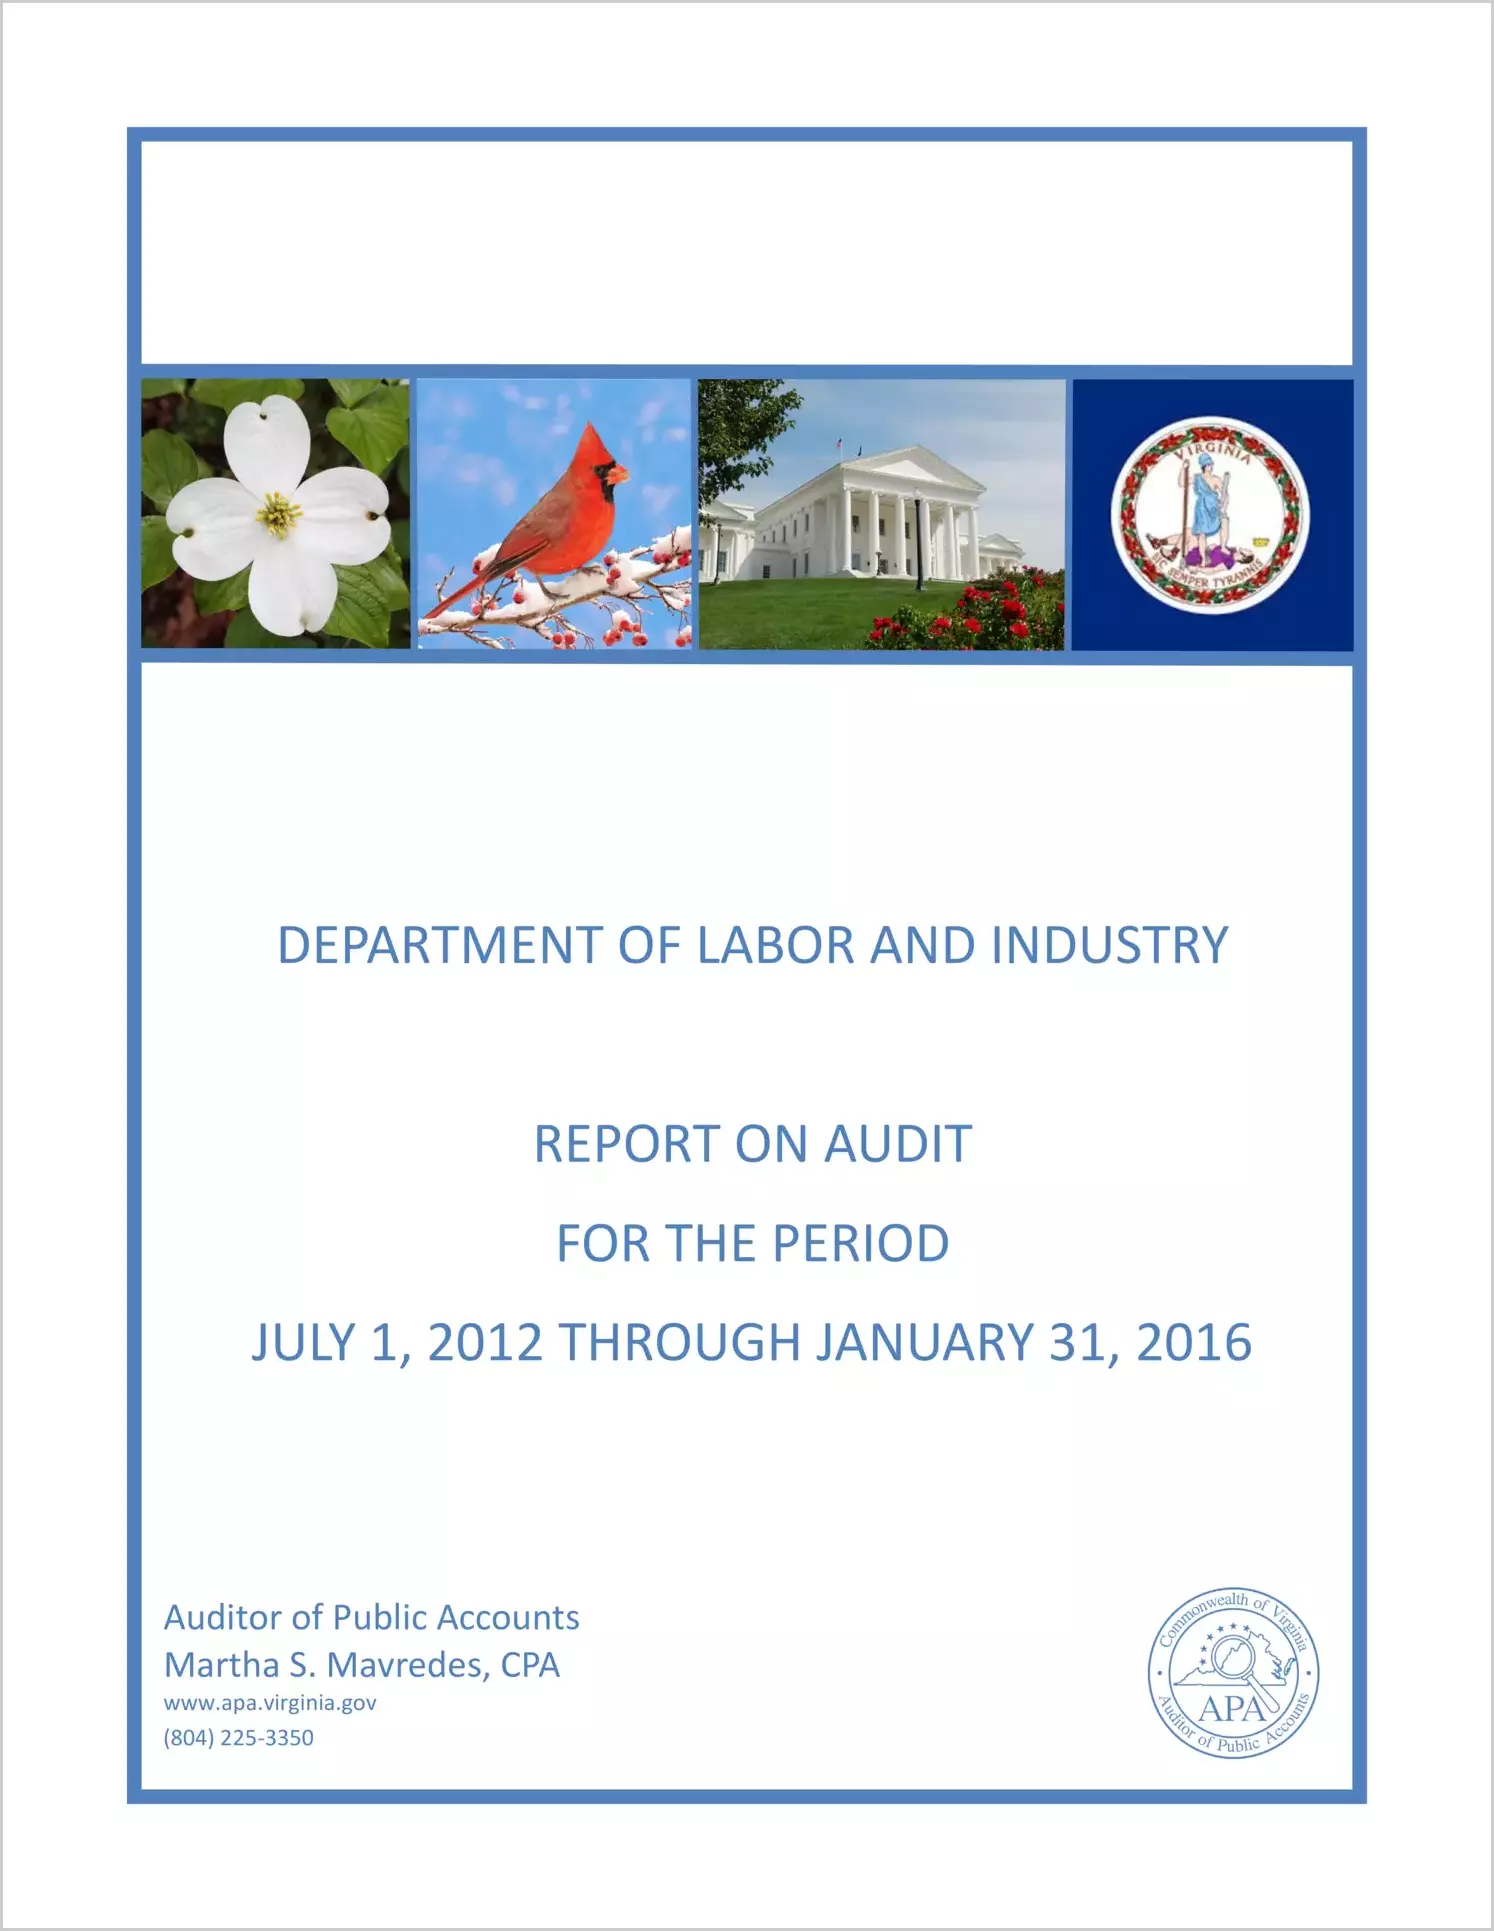 Department of Labor and Industry Report on Audit for the Period July 1, 2012 through January 31, 2016